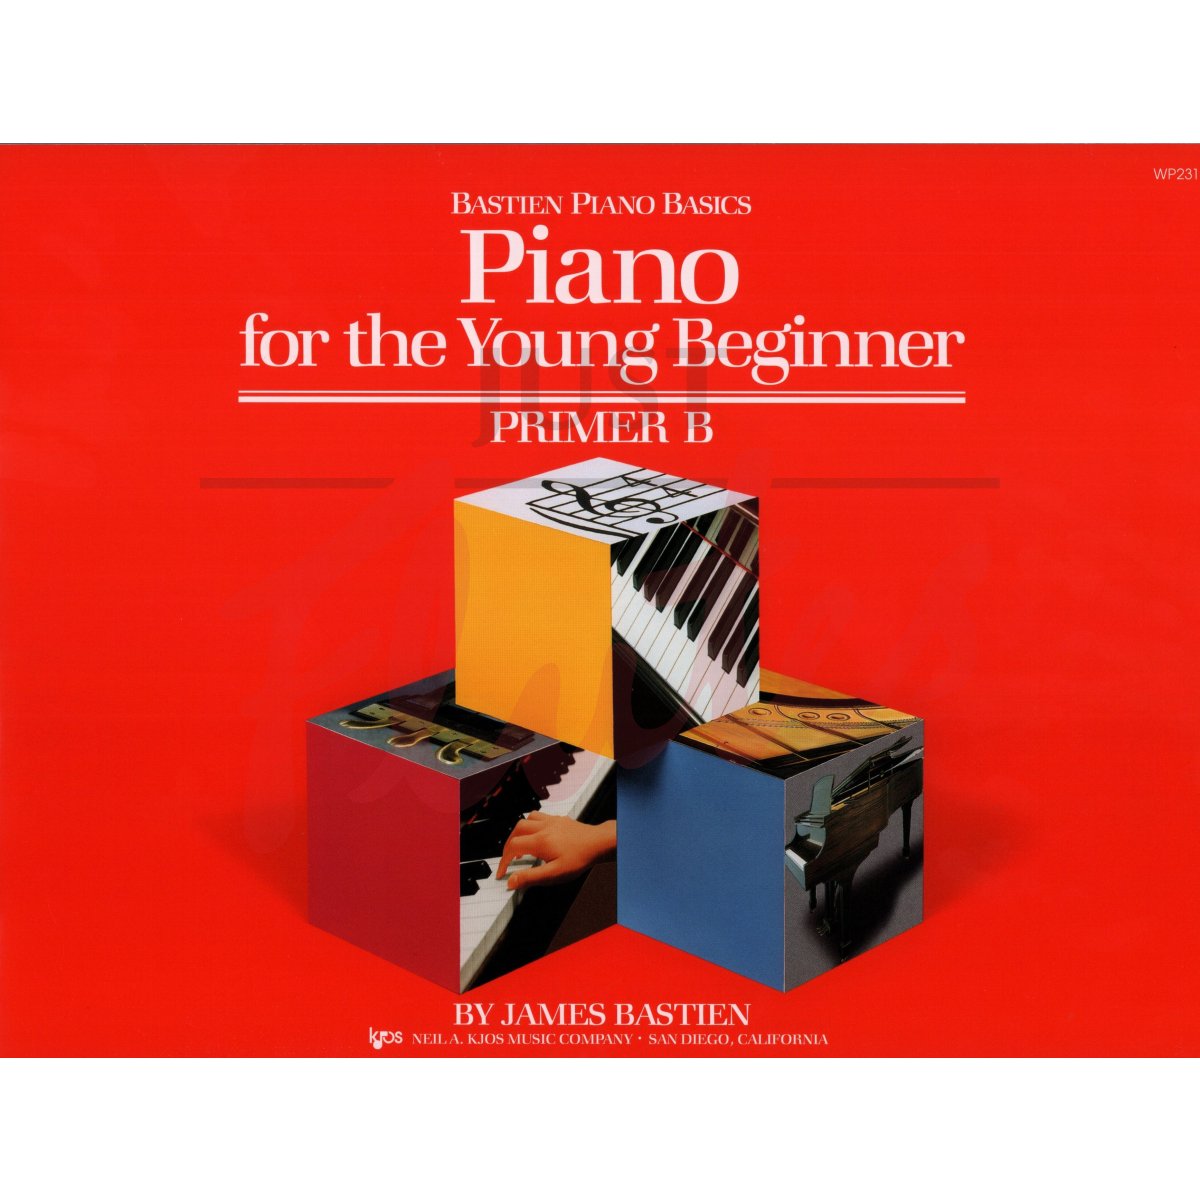 Piano for the Young Beginner: Primer B